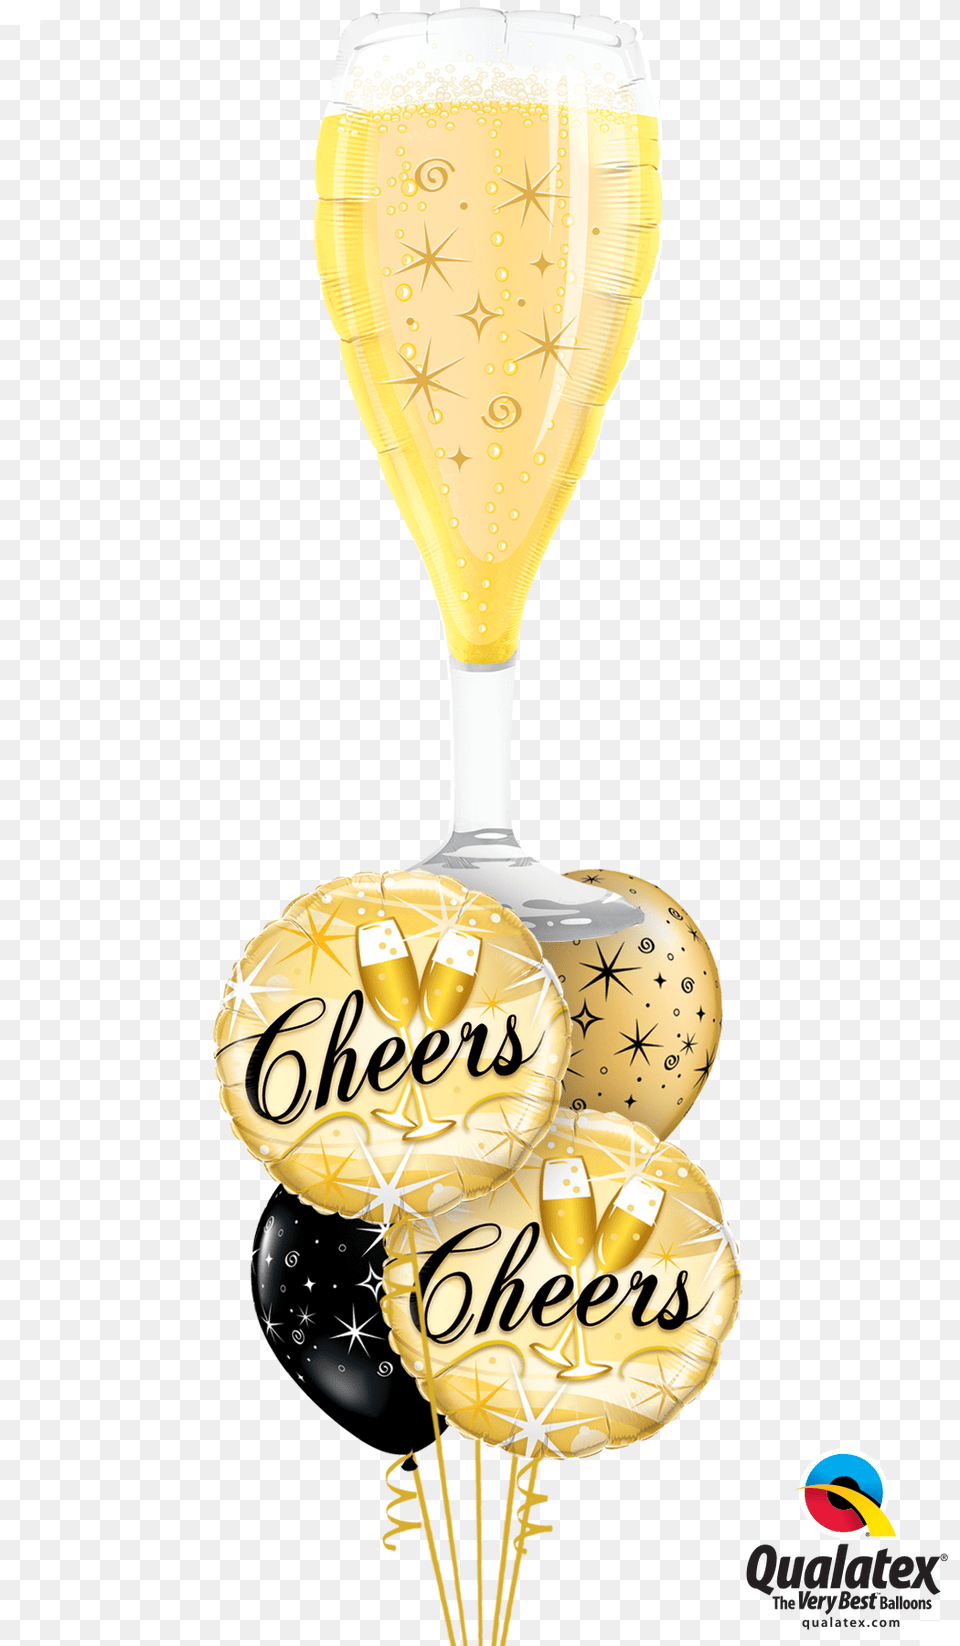 Bubbly Wine Glass Cheers Qualatex, Alcohol, Beverage, Liquor, Wine Glass Png Image